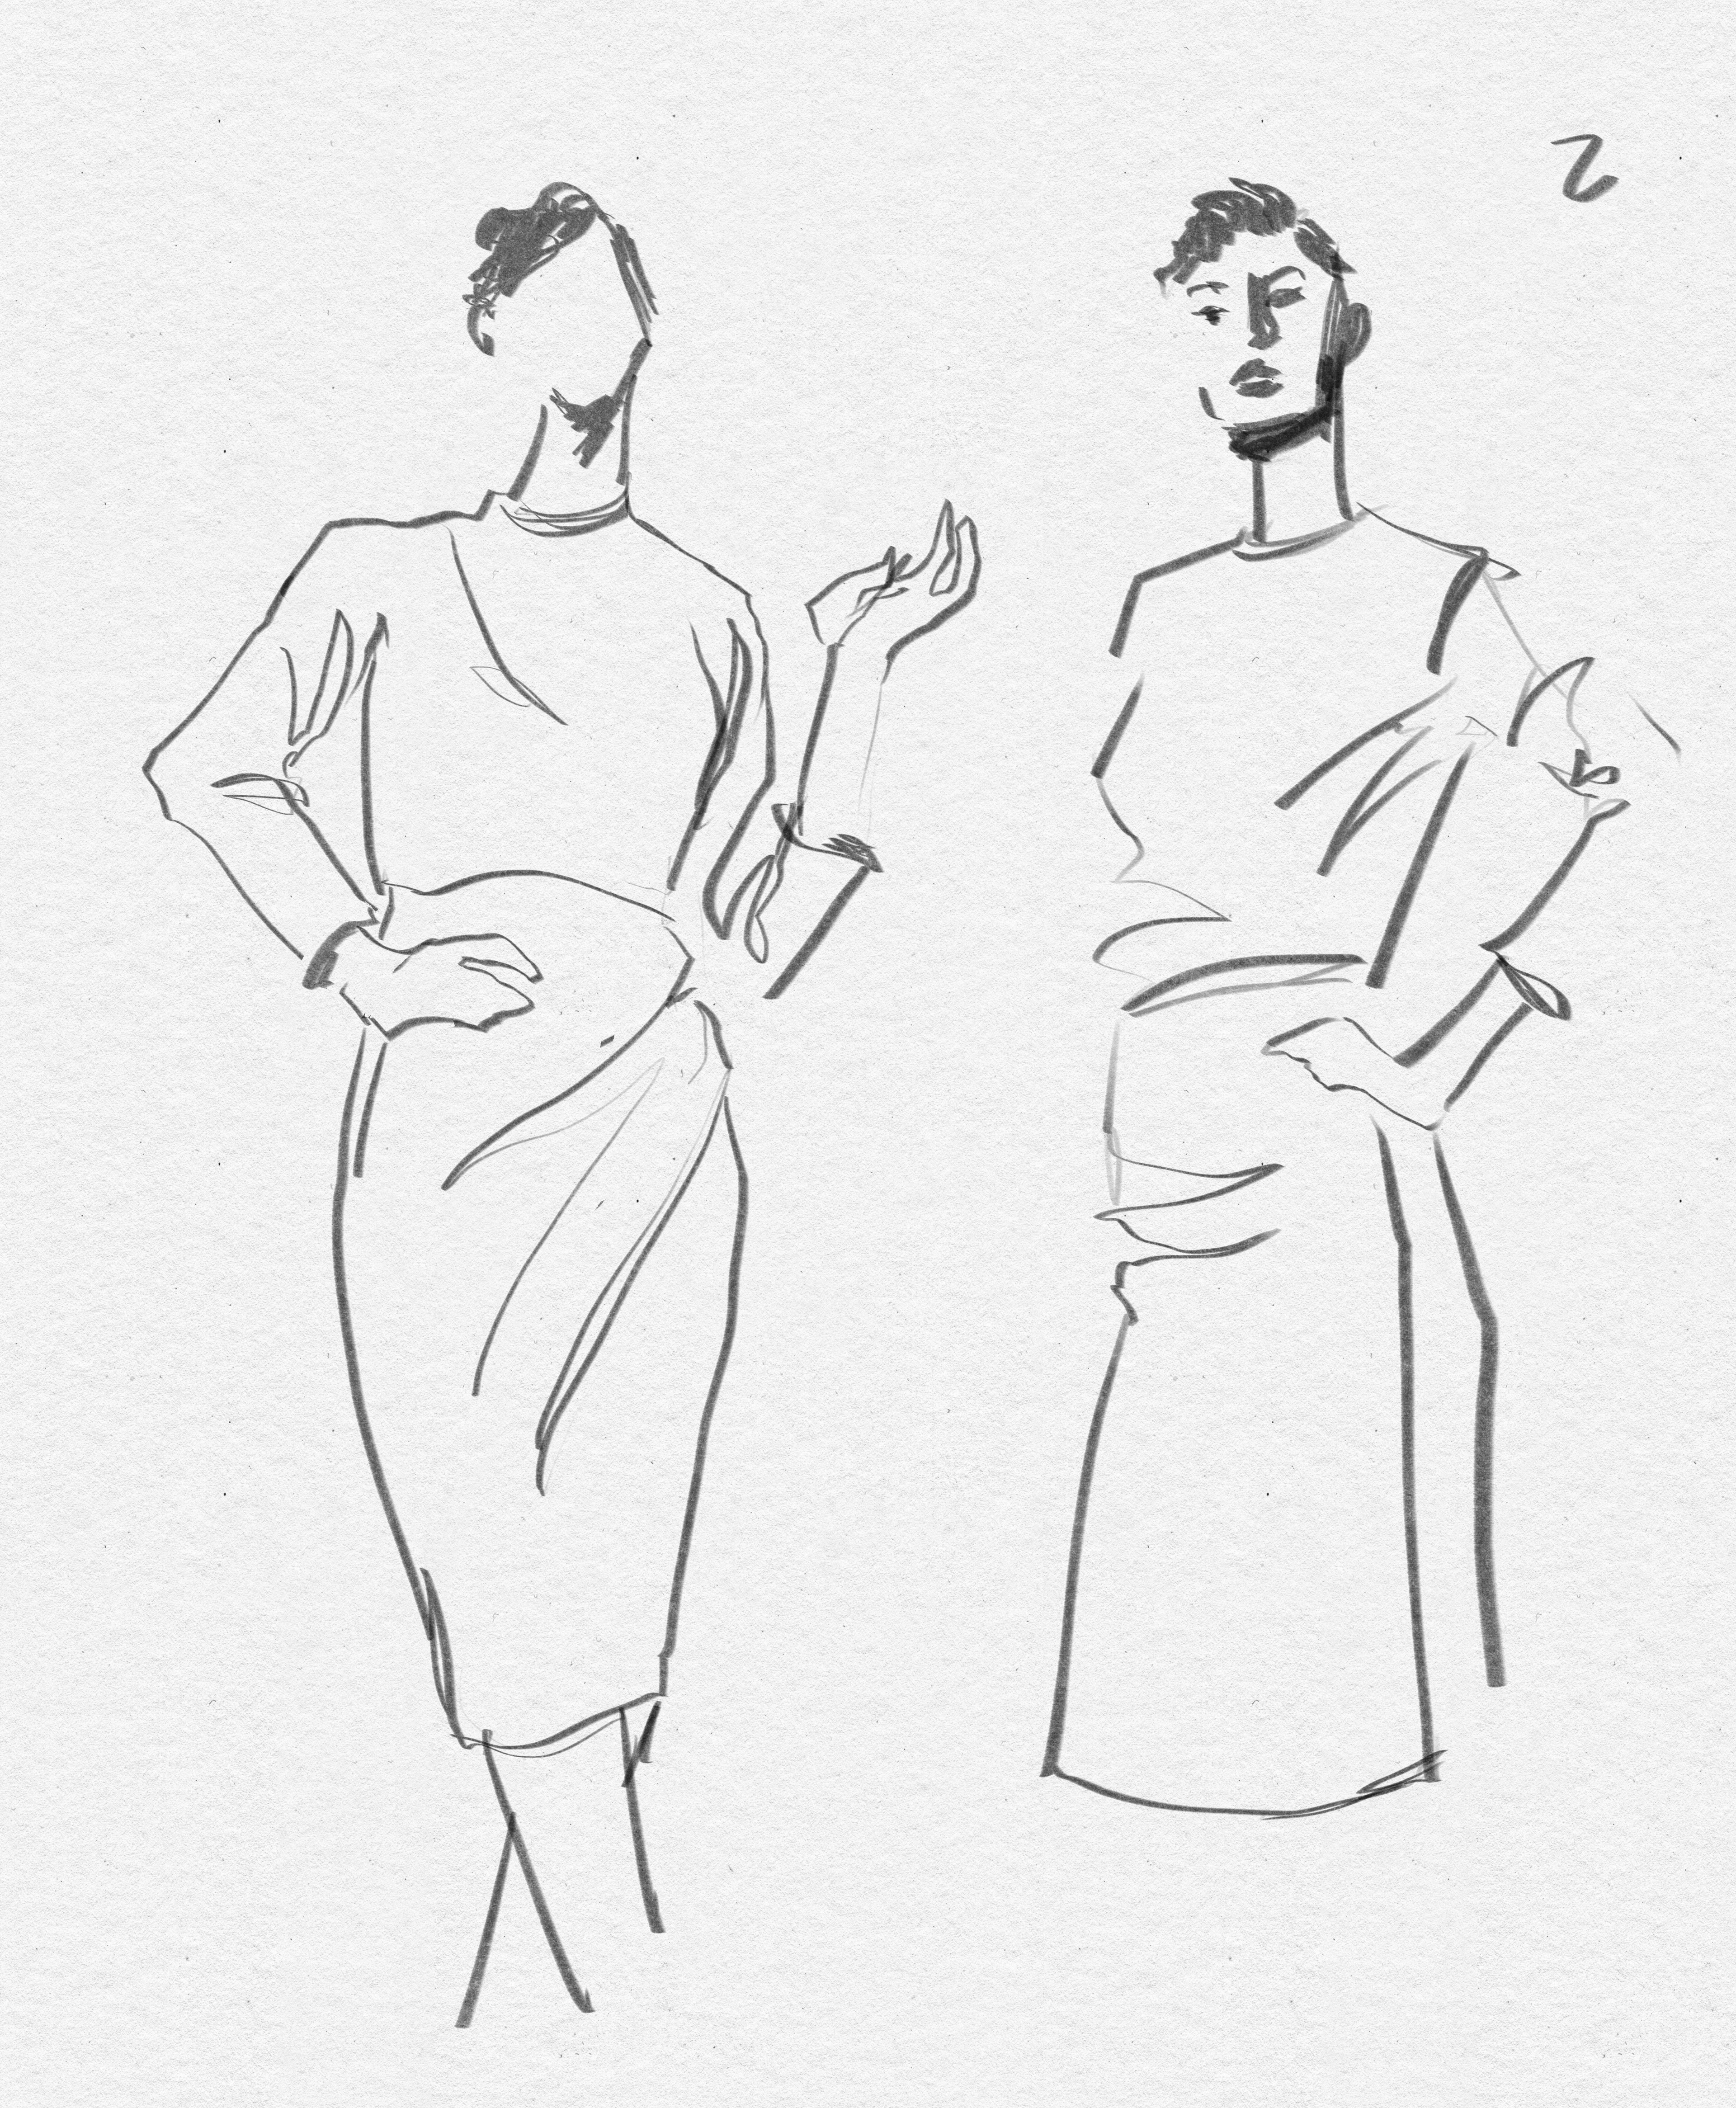 Fashion model drawings for a friend, you can see my style soften